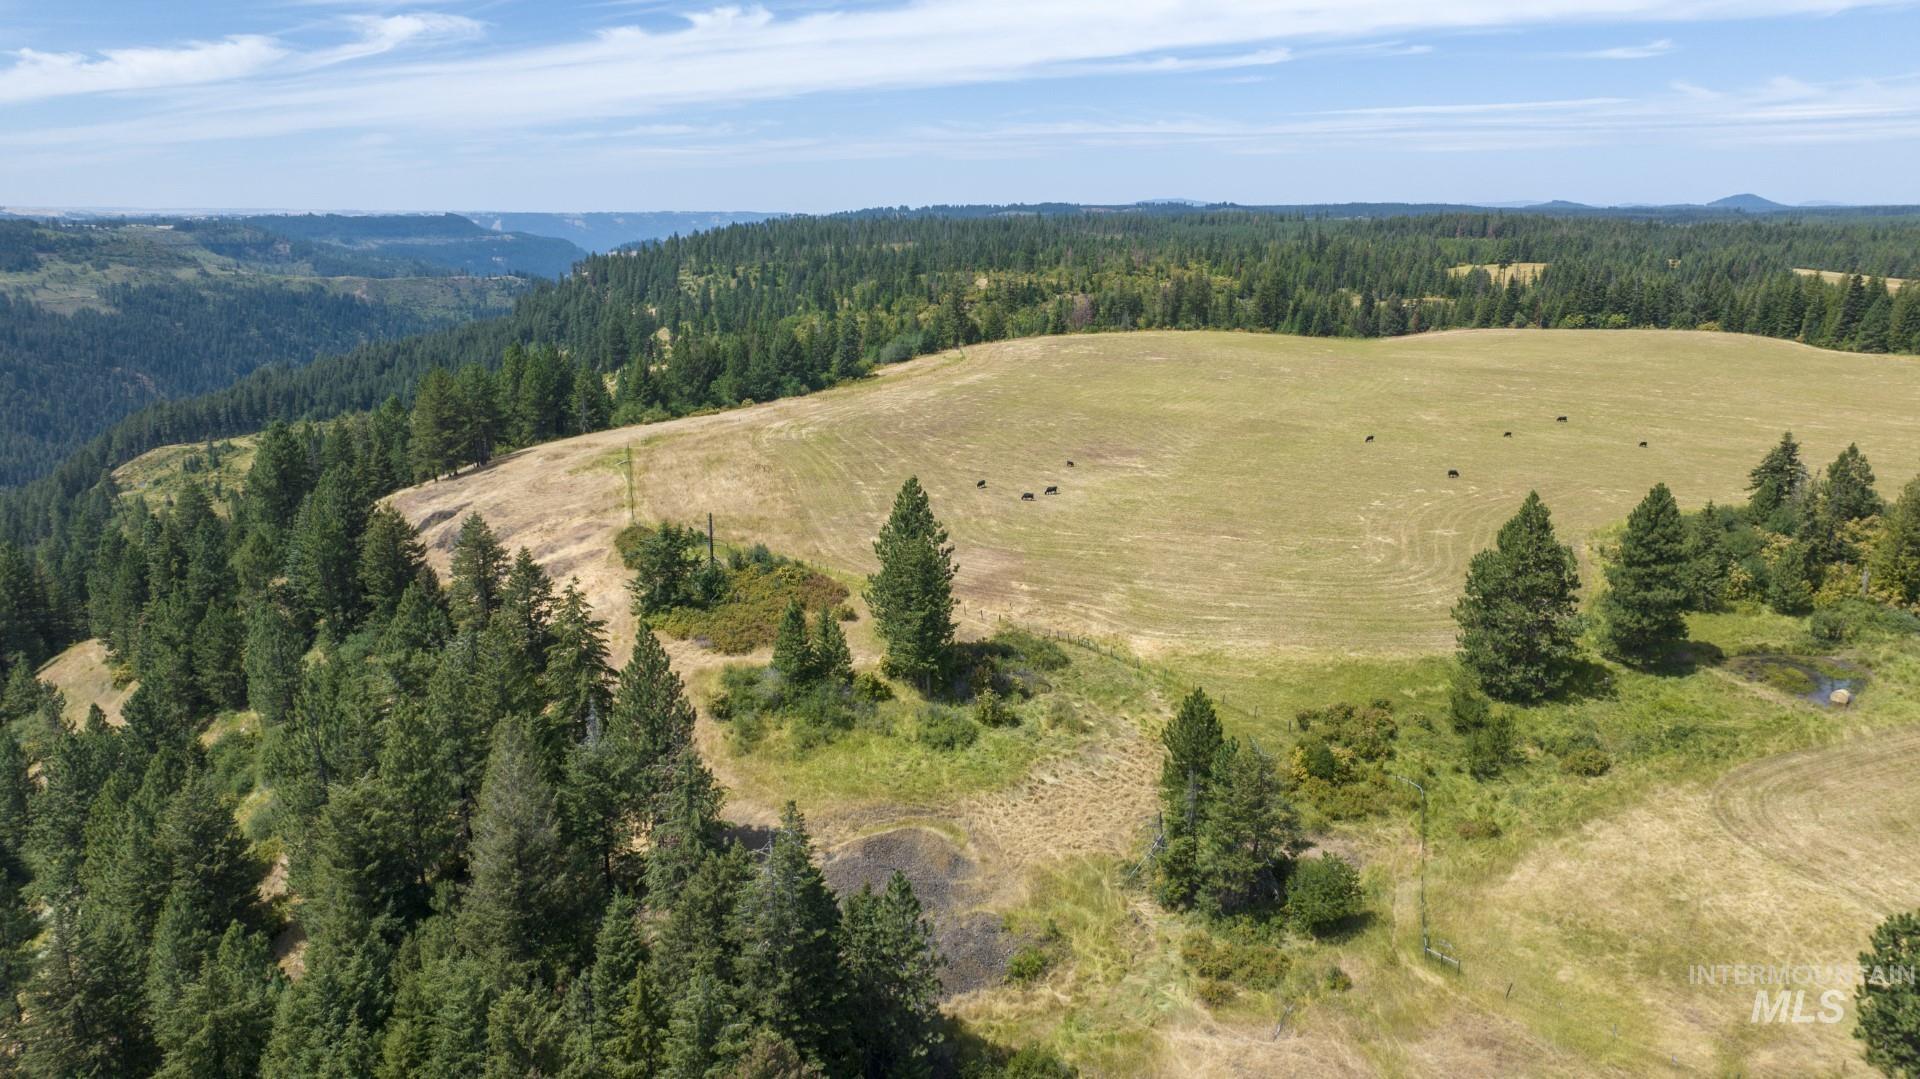 1605 Jasmine Ln, Parcel 15, Weippe, Idaho 83553, Land For Sale, Price $185,000,MLS 98854997